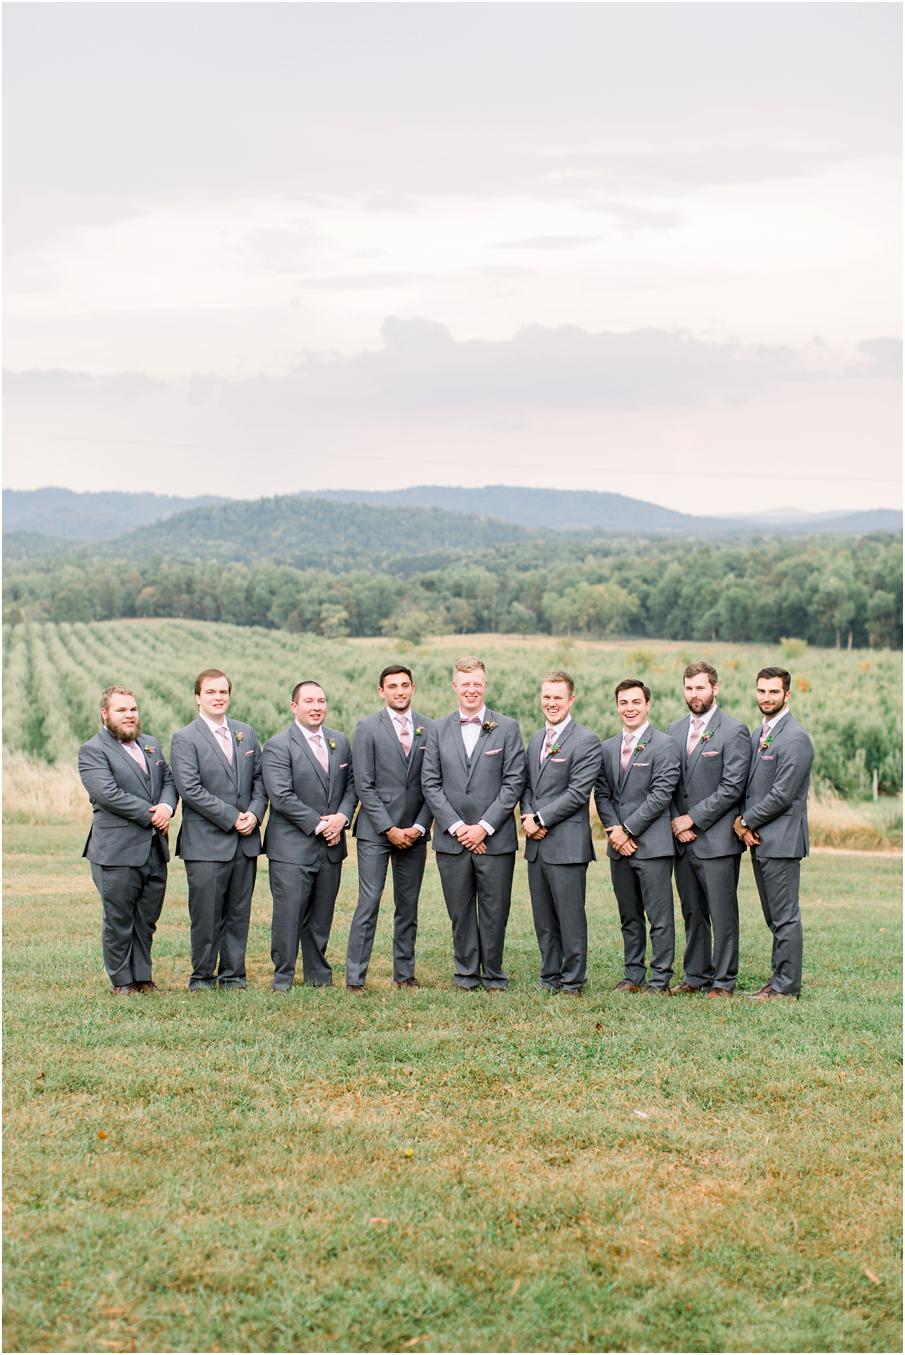 Groom and groomsmen portrait with mountains and vineyards in the background